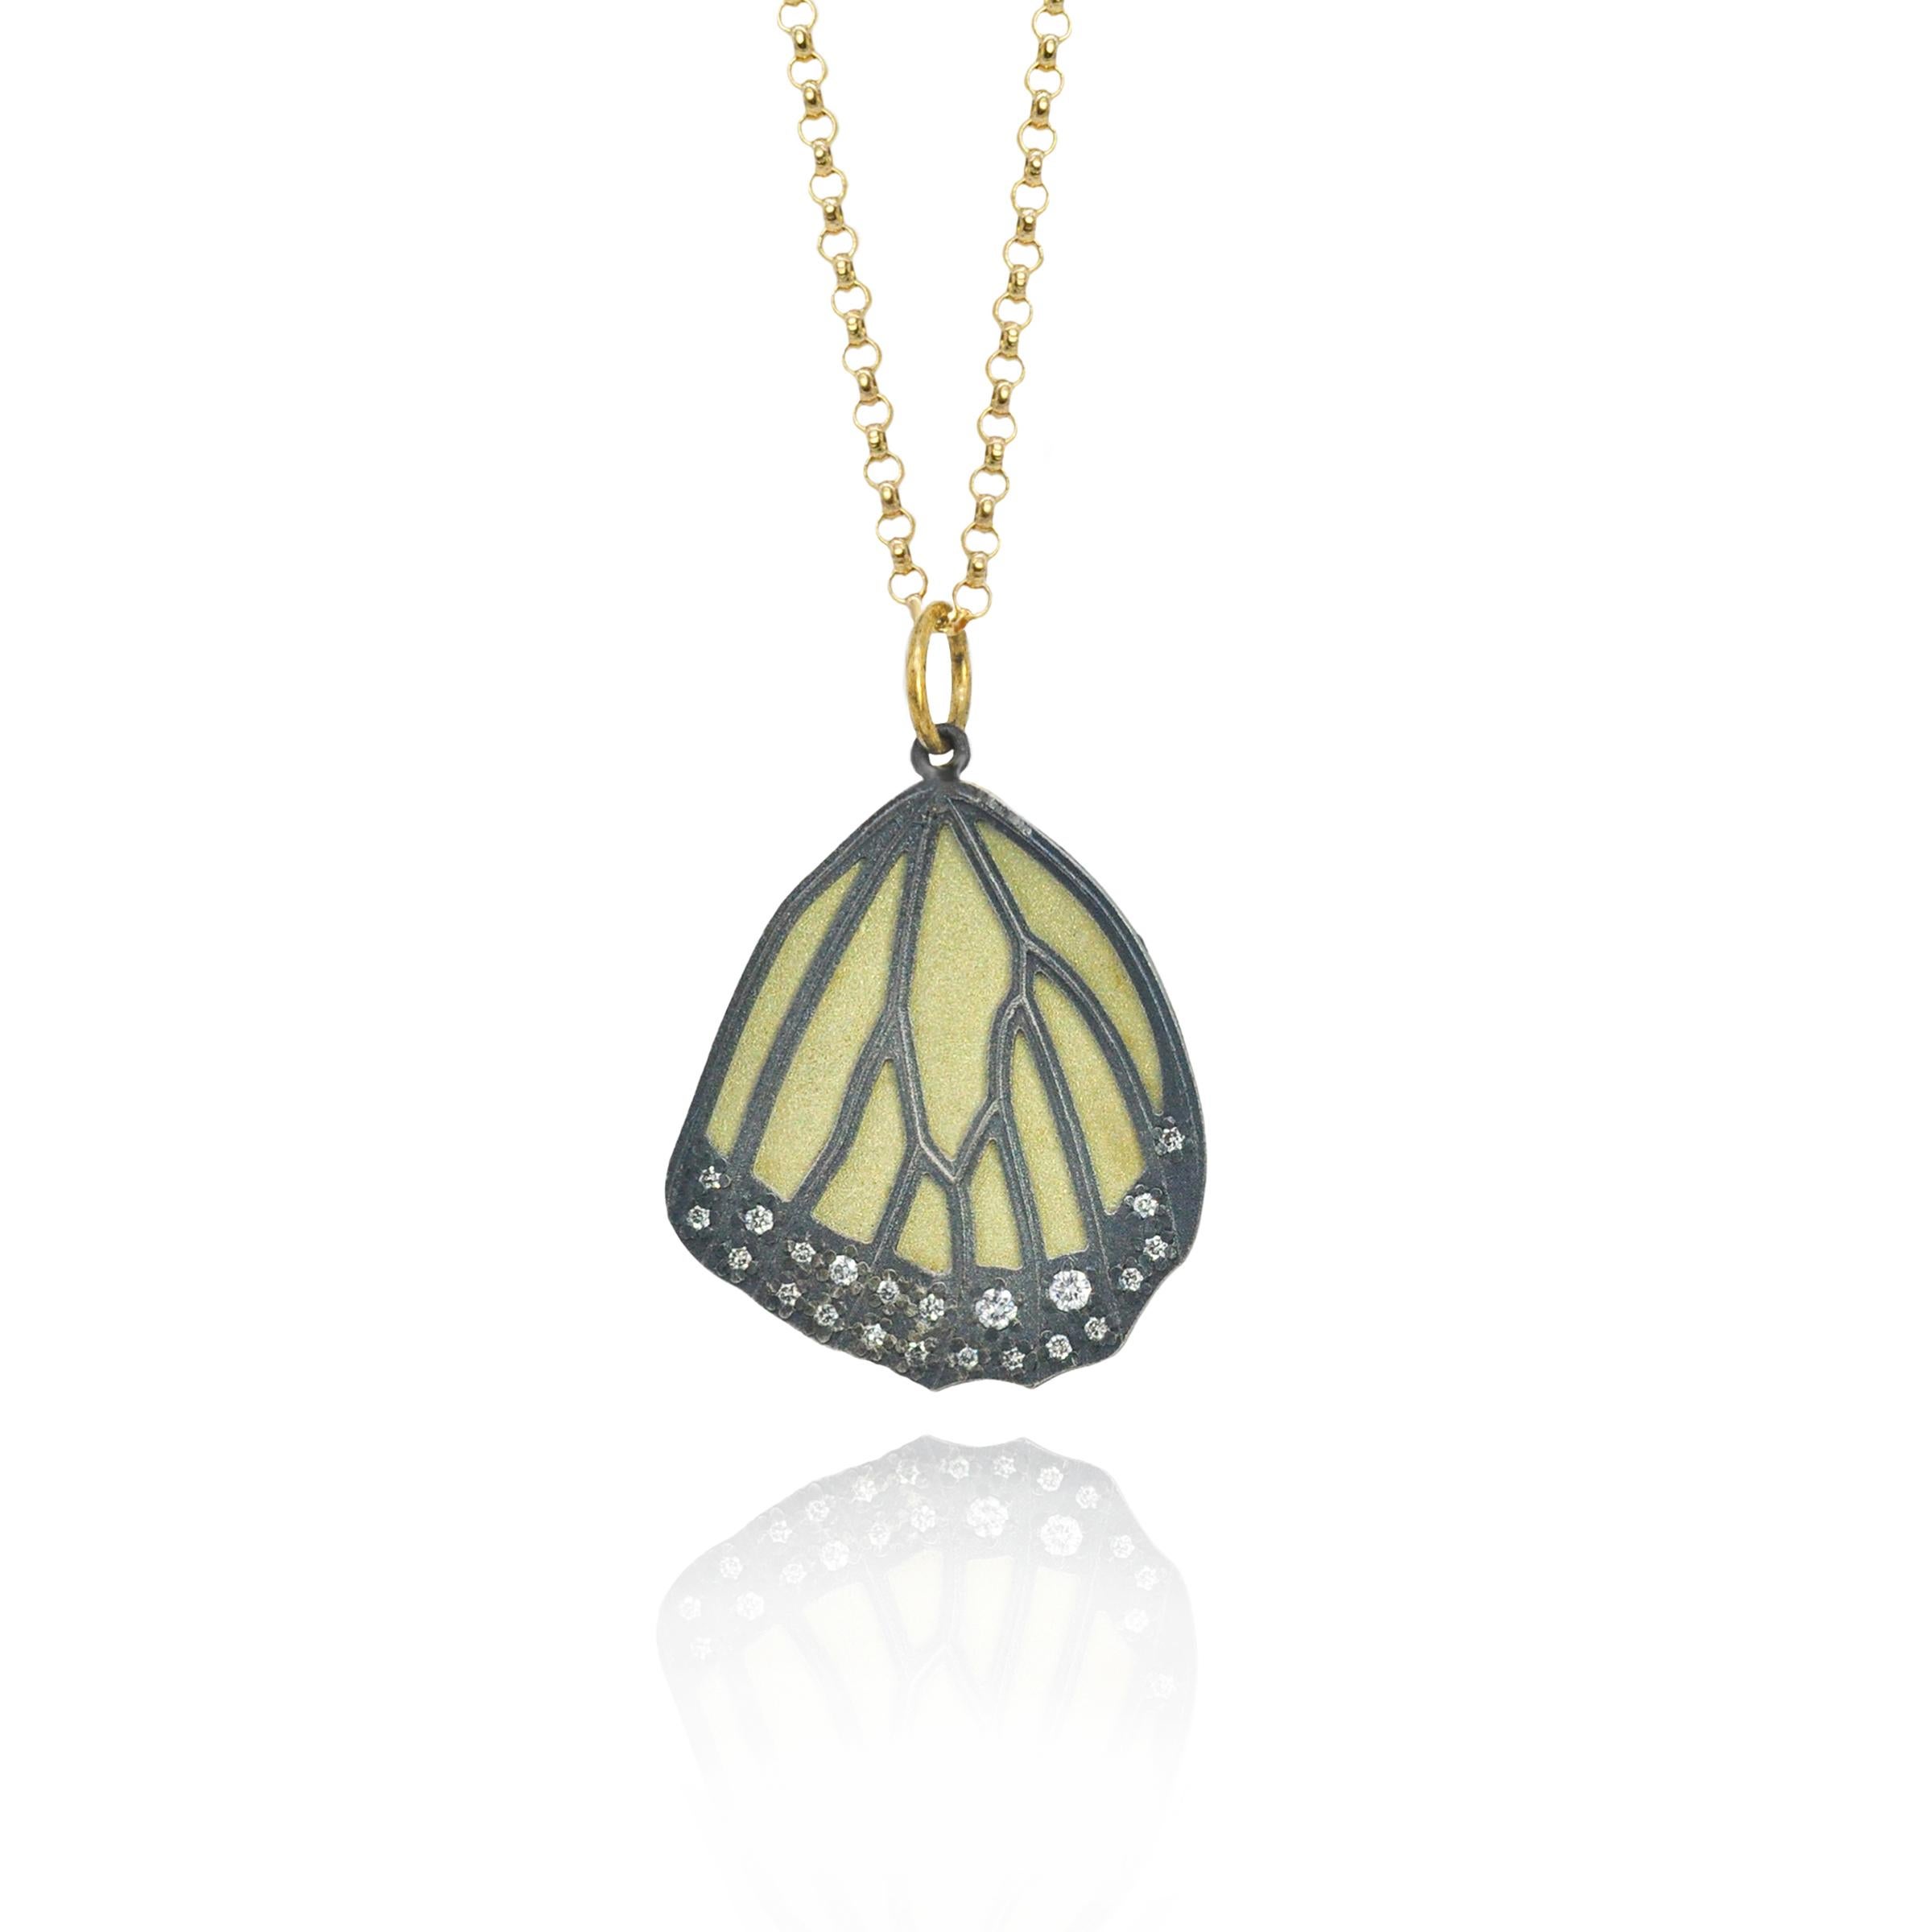 A true Rebecca Myers Design signature piece, our monarch butterfly wing designs are modeled after nature's masterpiece and hand crafted with the highest quality materials. Oxidized sterling silver is layered over 18k yellow gold, with sparkling pave